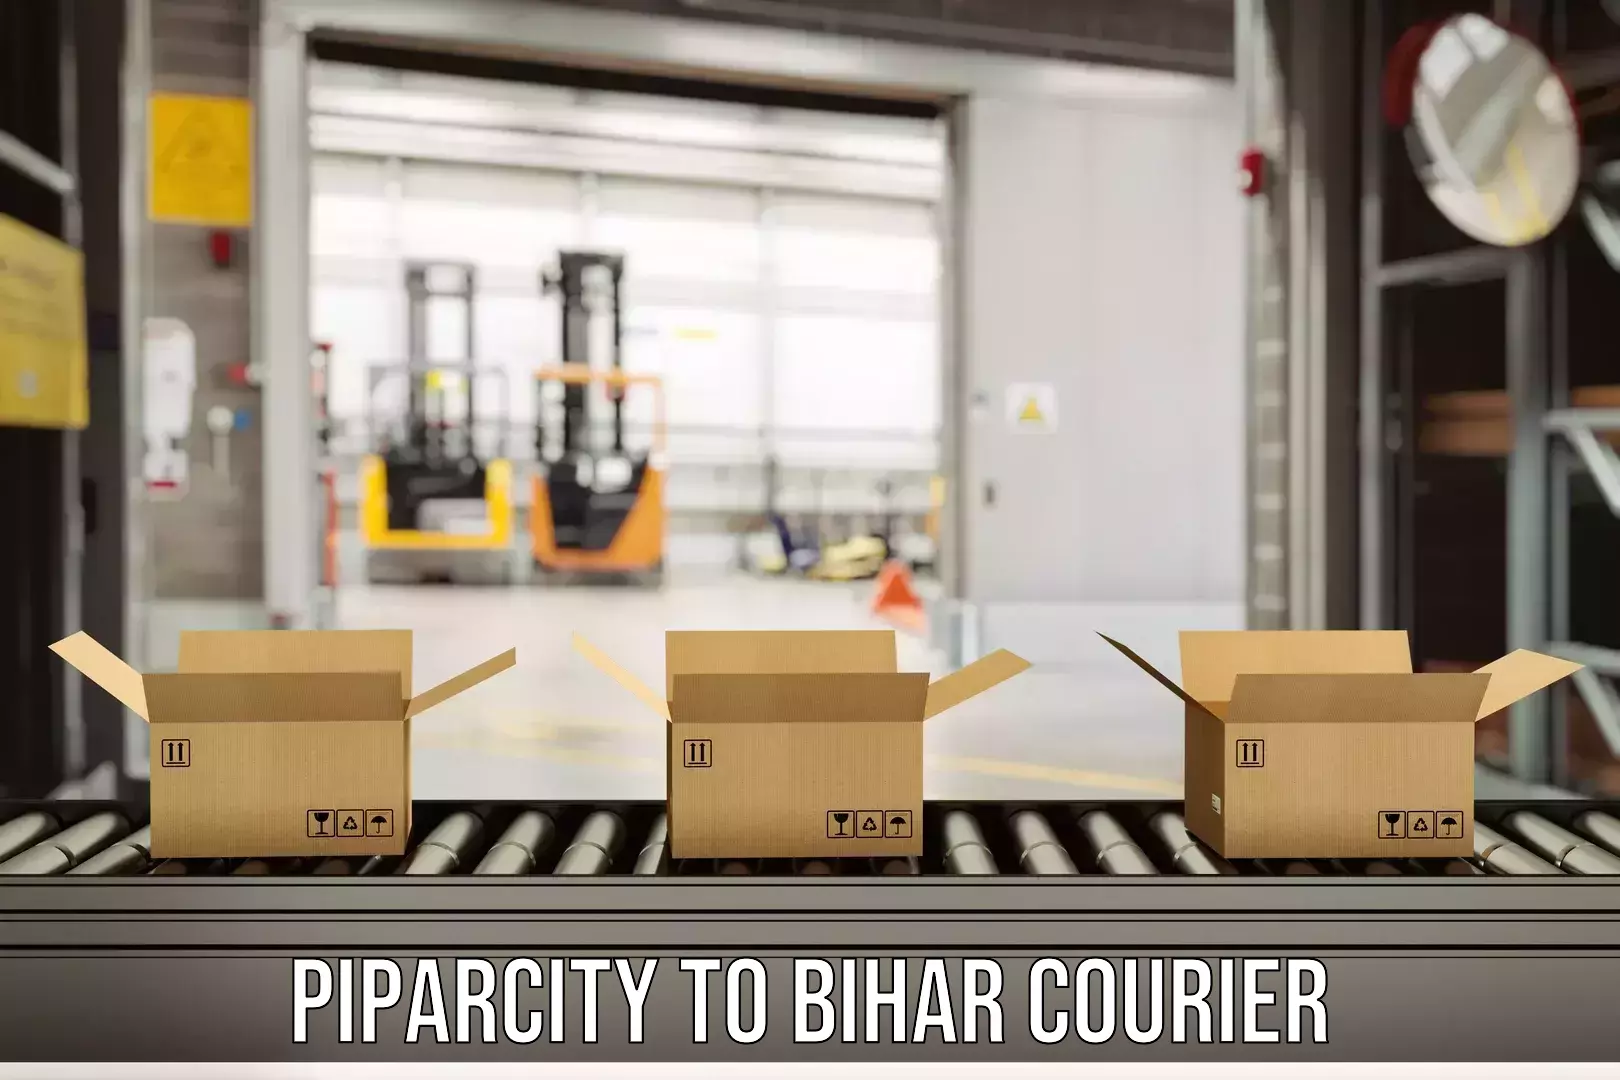 Modern delivery methods Piparcity to Bihar